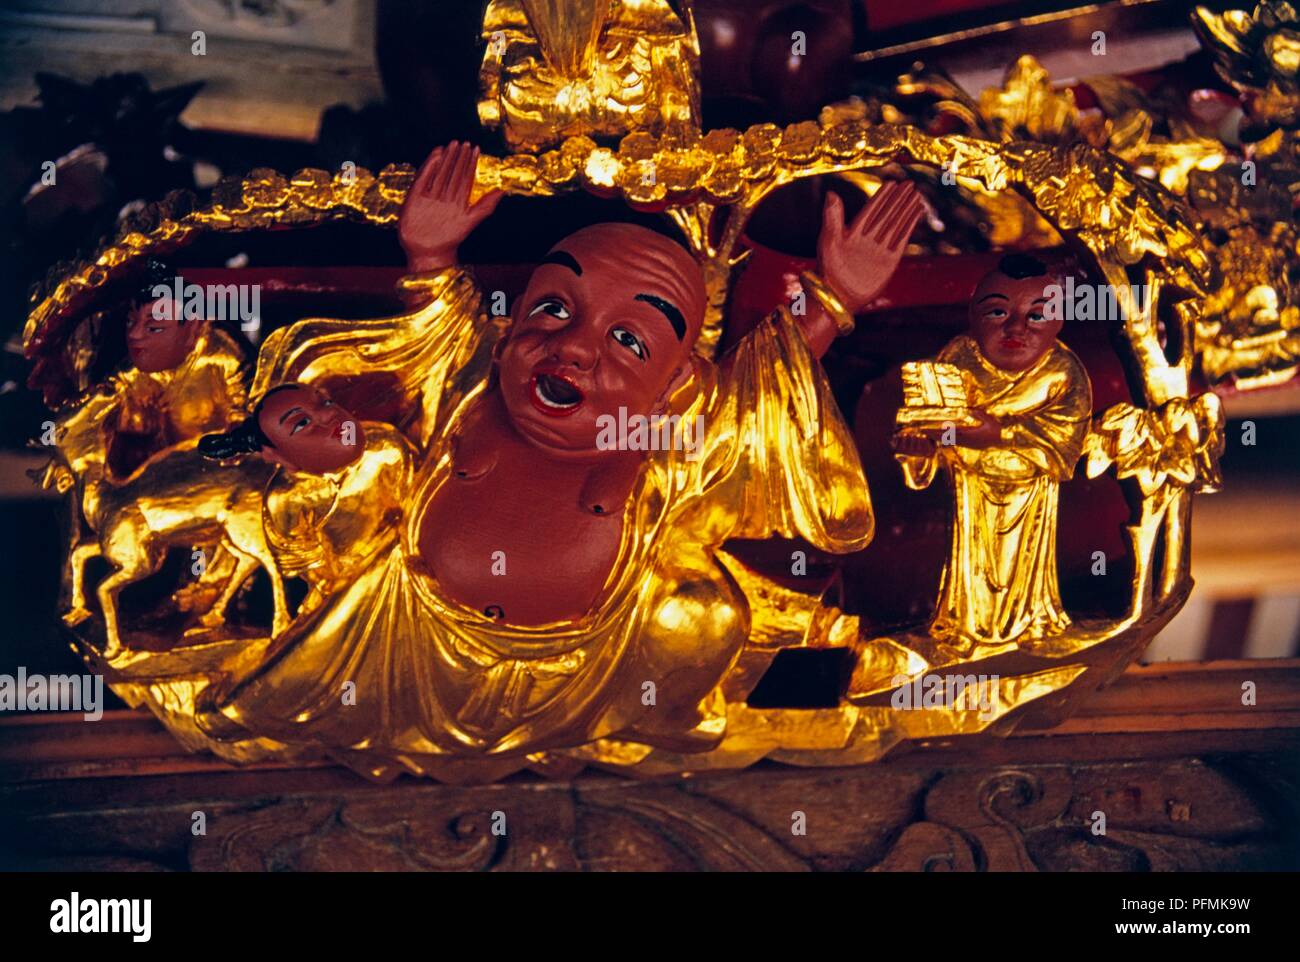 Singapore, Singapore City, Thian Hock Keng Temple, carving of a gilded Buddha Stock Photo